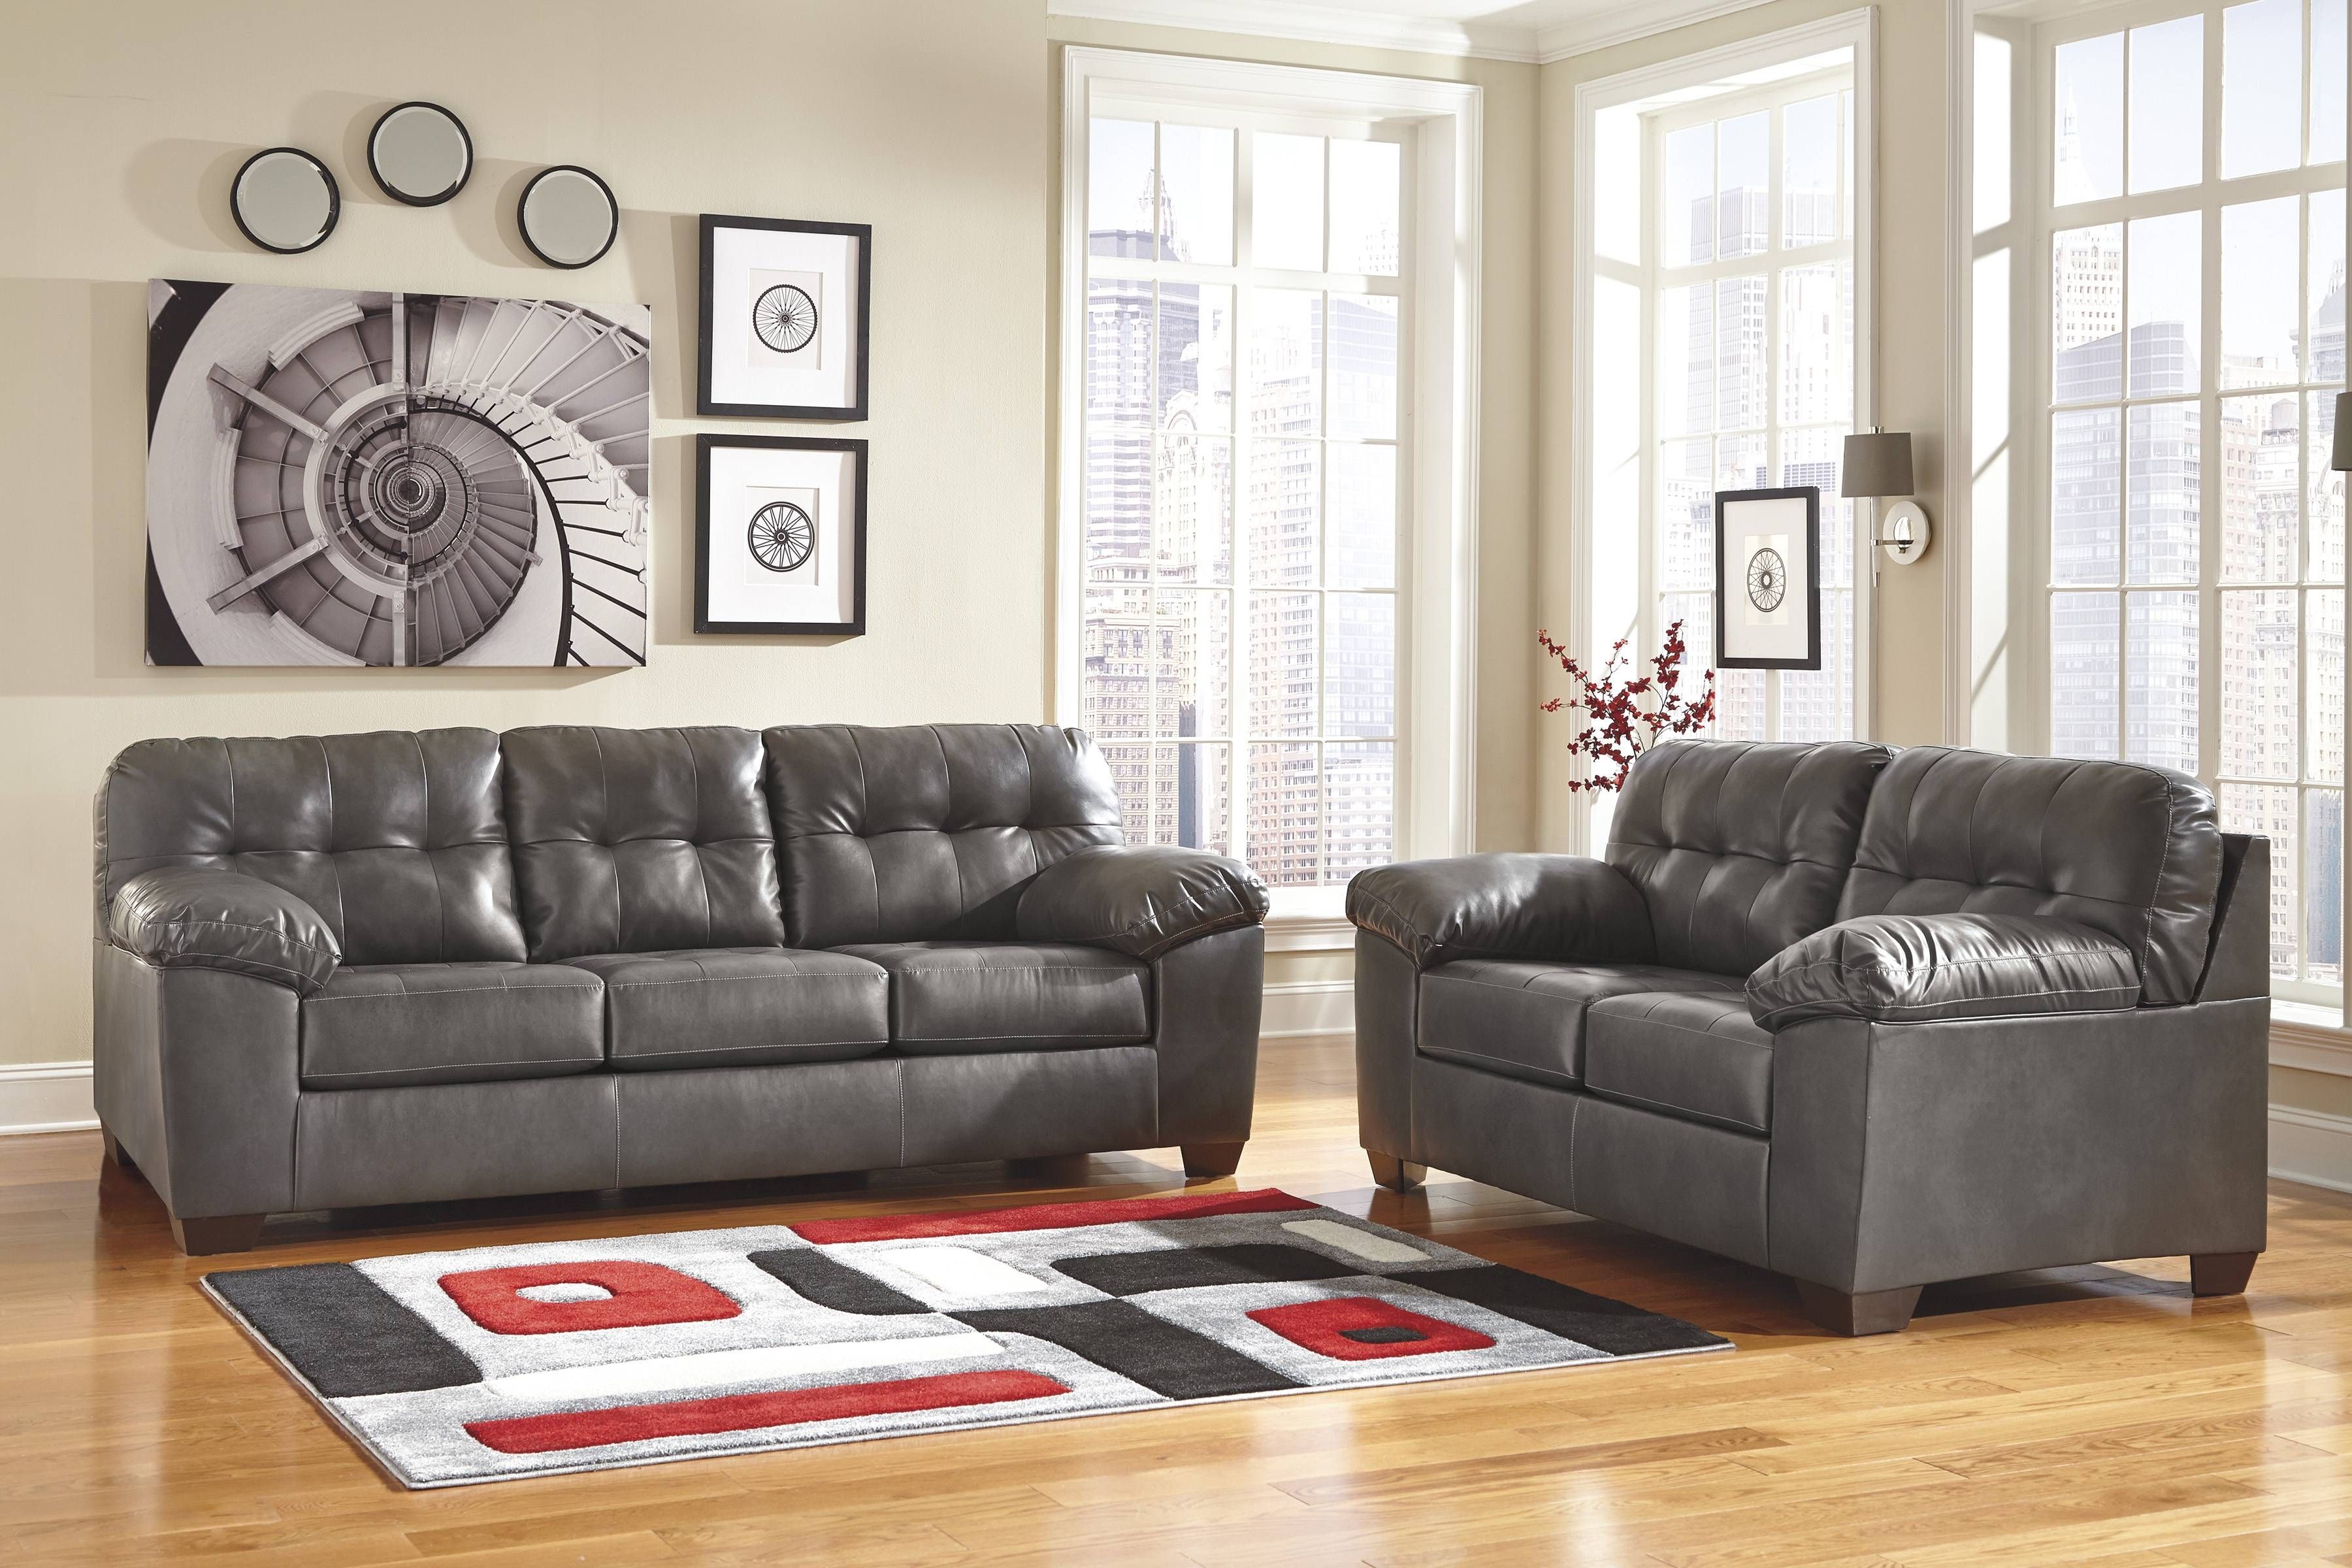 Leather Sectional Sofa Ashley Furniture – Home And Interior Regarding Ashley Furniture Corduroy Sectional Sofas (View 15 of 15)